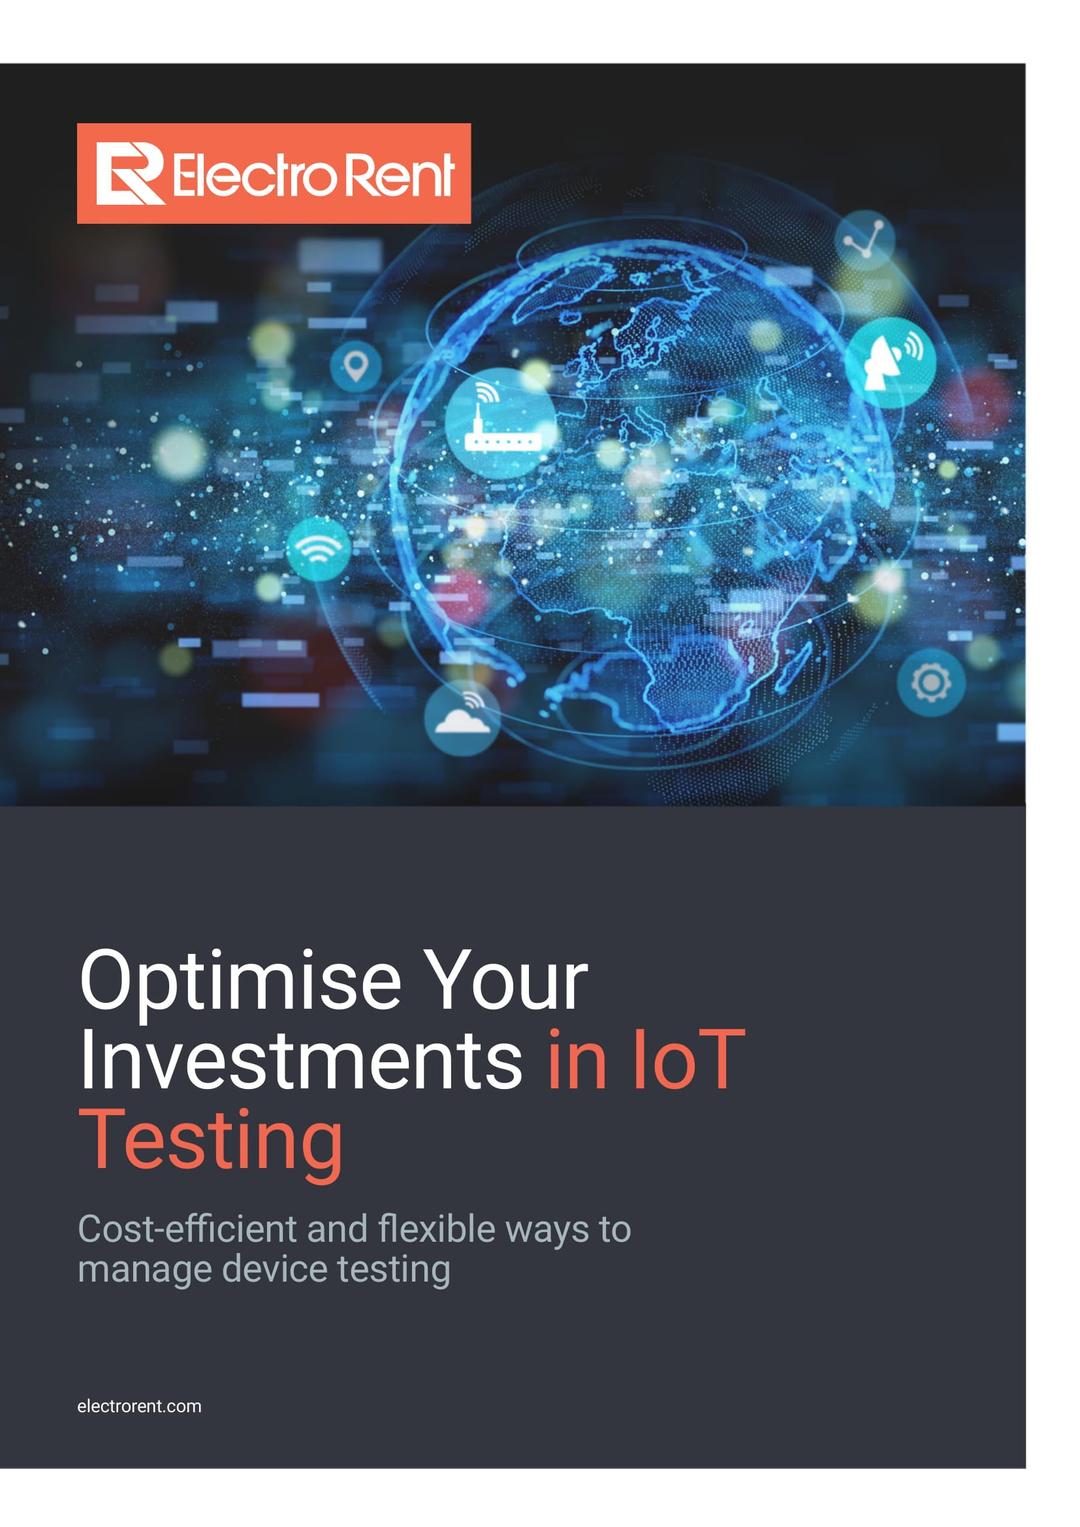 Optimise Your Investments in IoT Testing, image